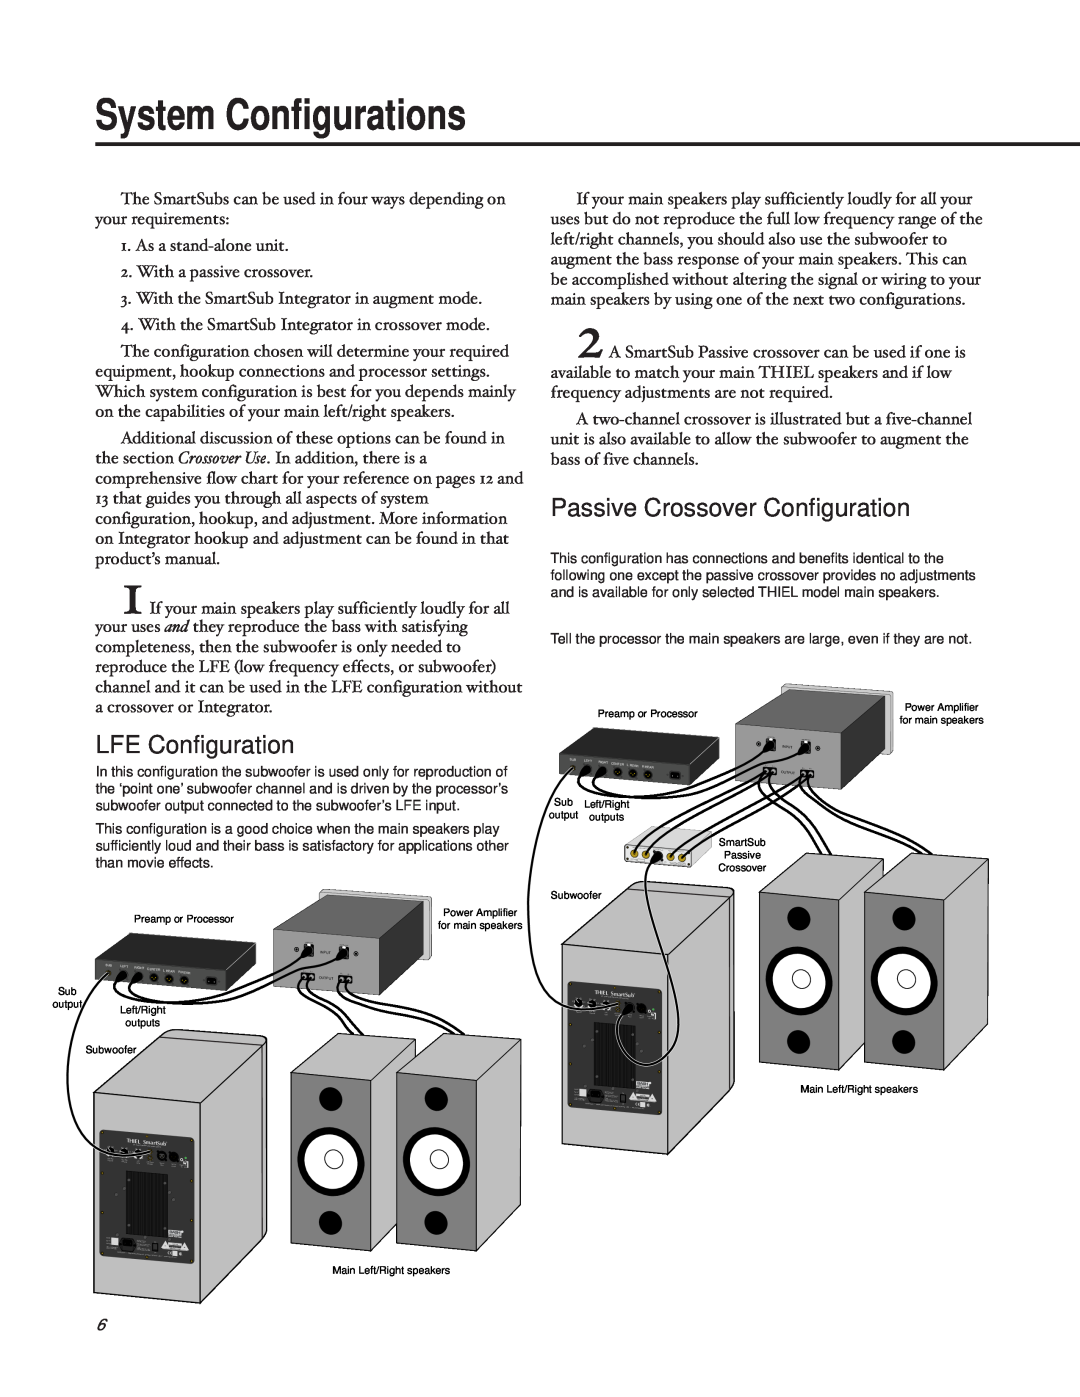 Thiel Audio Products SS1 Subwoofer manual System Configurations, Passive Crossover Configuration, LFE Configuration 